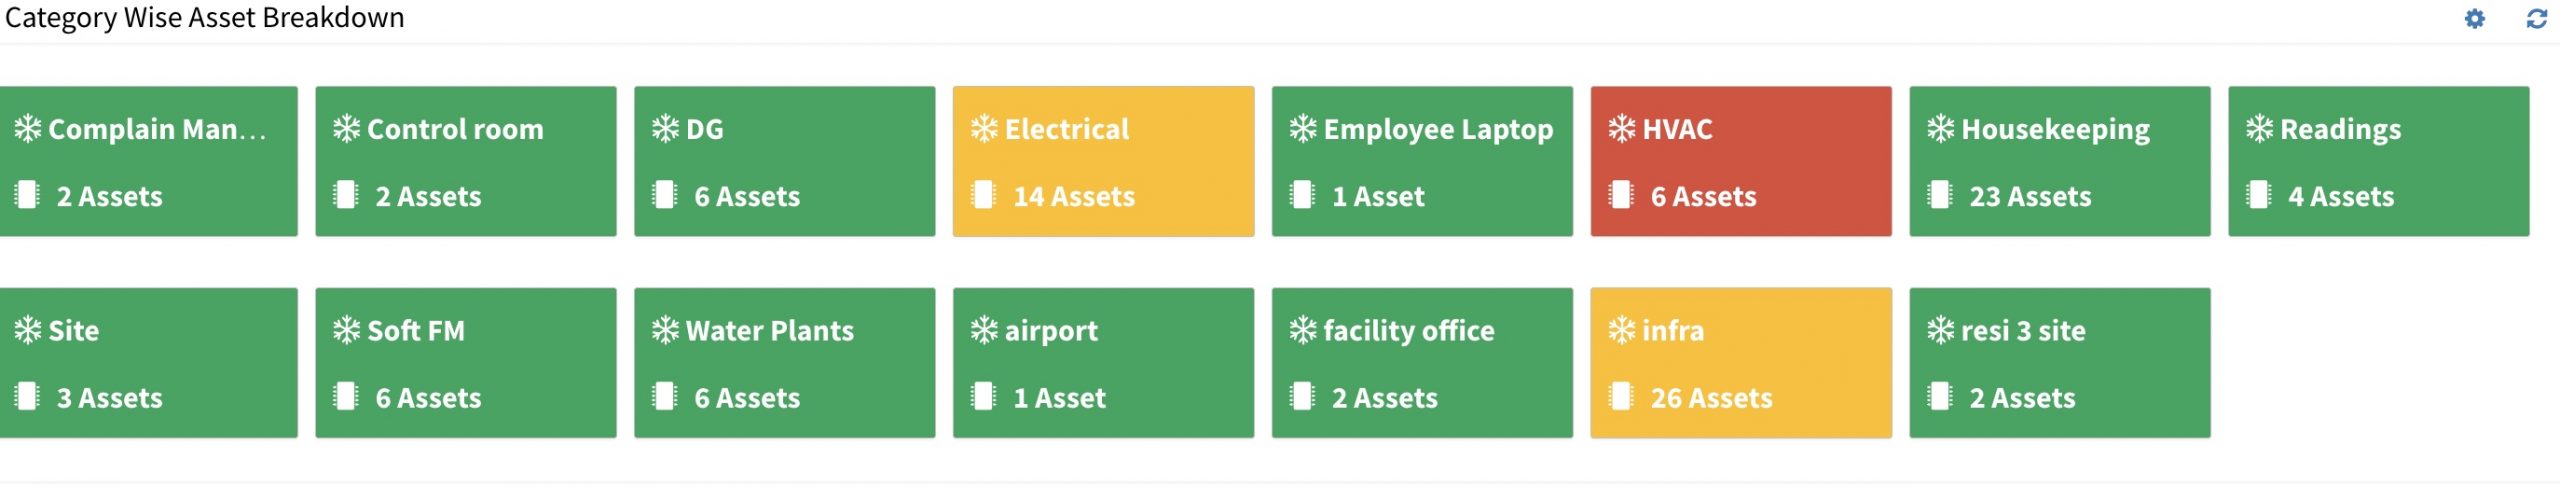 Equipment Status dashboard of building in cmms